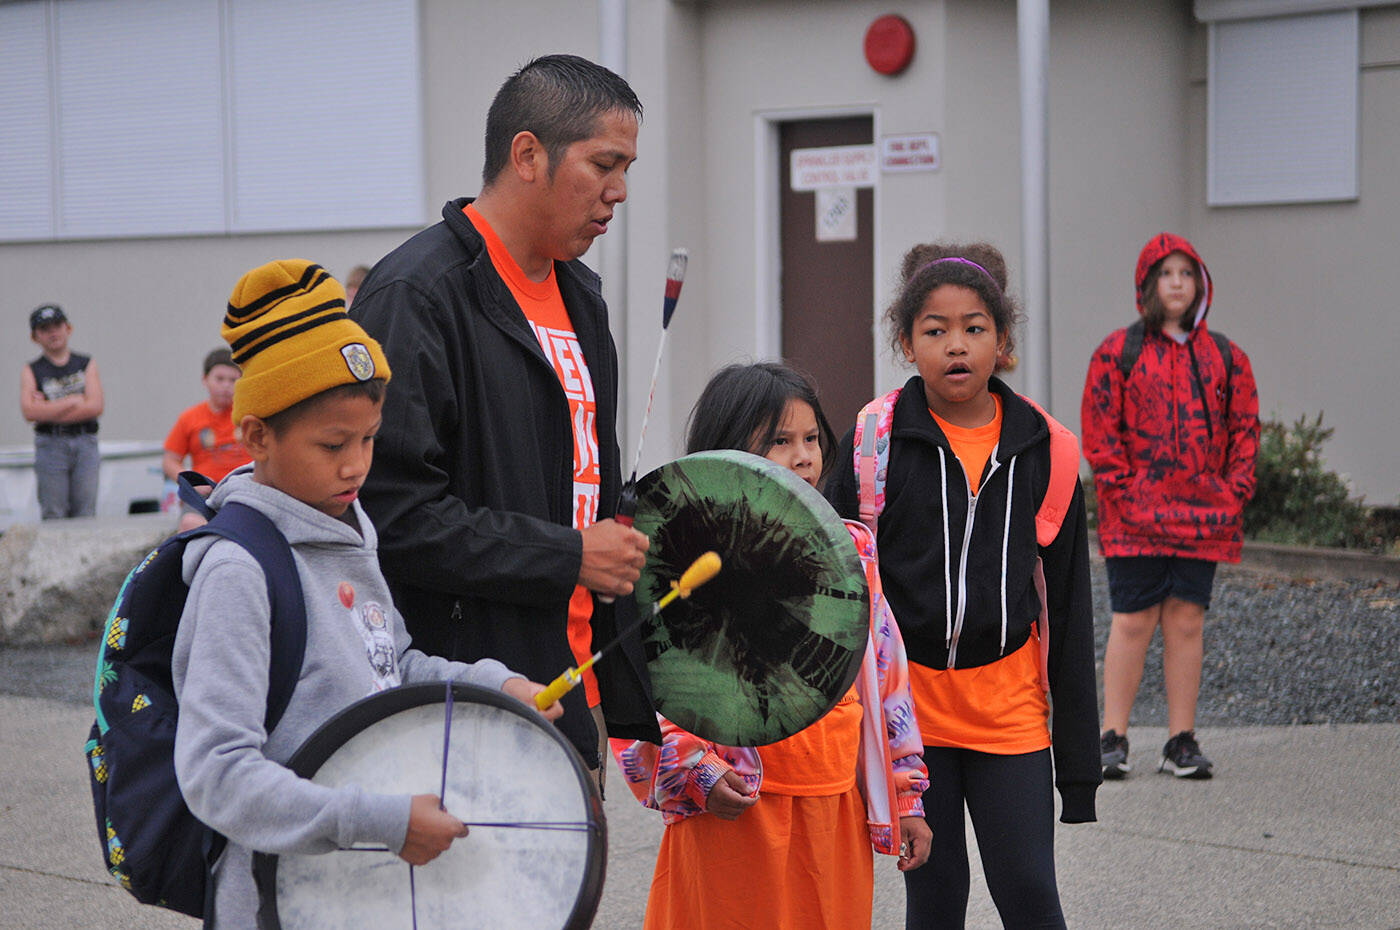 Justin Williams drums and sings with children outside Bernard Elementary on Thursday, Sept. 29, 2022. The drumming and singing happened as children arrived that morning, just before the whole school gathered for a group photo with their new orange T-shirts given to by the parent advisory council. (Jenna Hauck/ Chilliwack Progress)